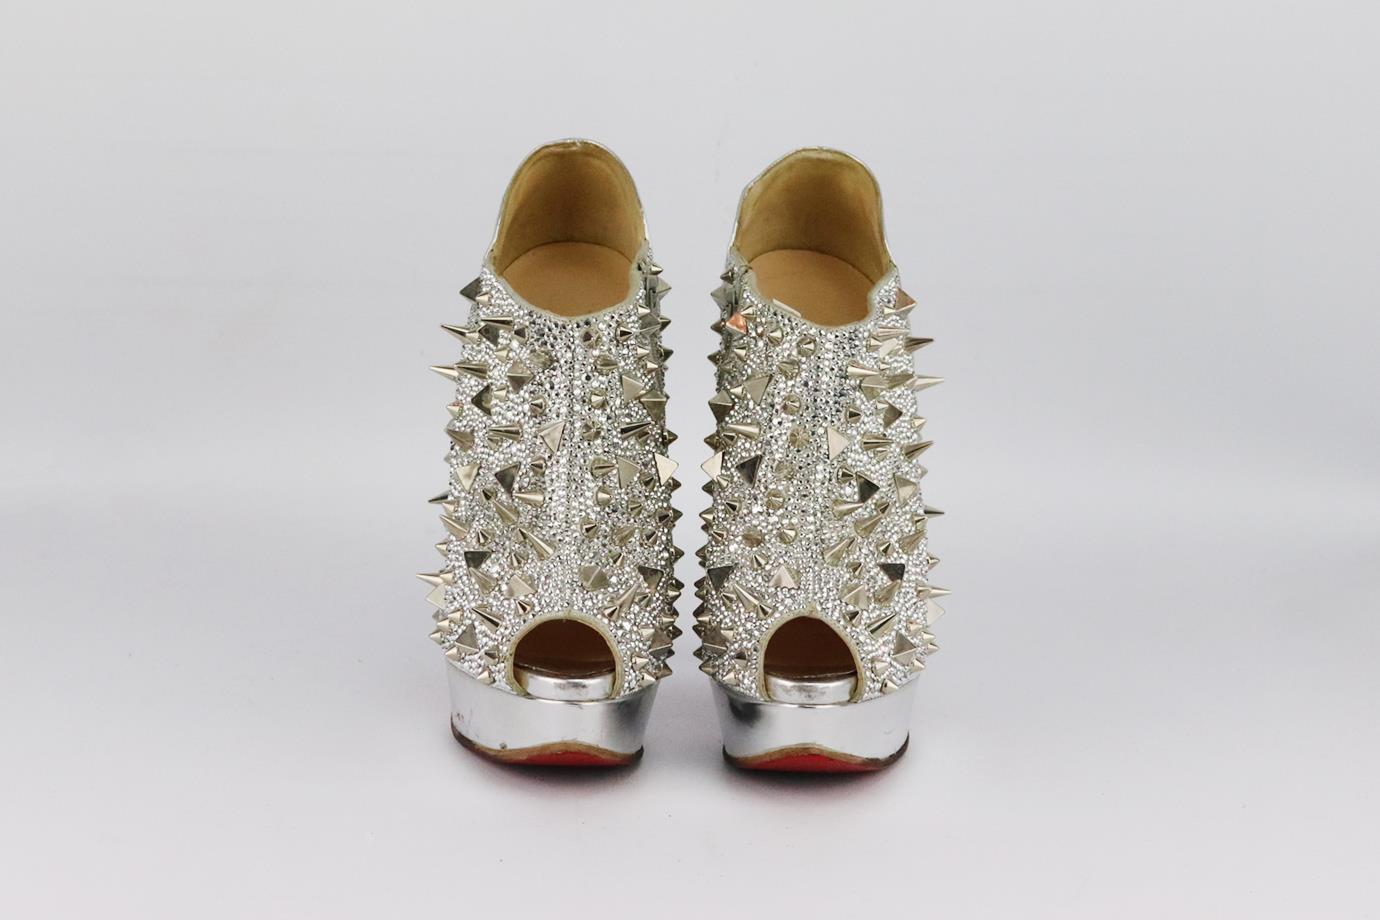 Christian Louboutin crystal spiked leather platform ankle boots. Made from metallic crystal embellishment with spikes in a peep toe silhouette and set on the brand’s iconic red sole. Silver. Zip fastening at side. Does not come with box or dustbag.